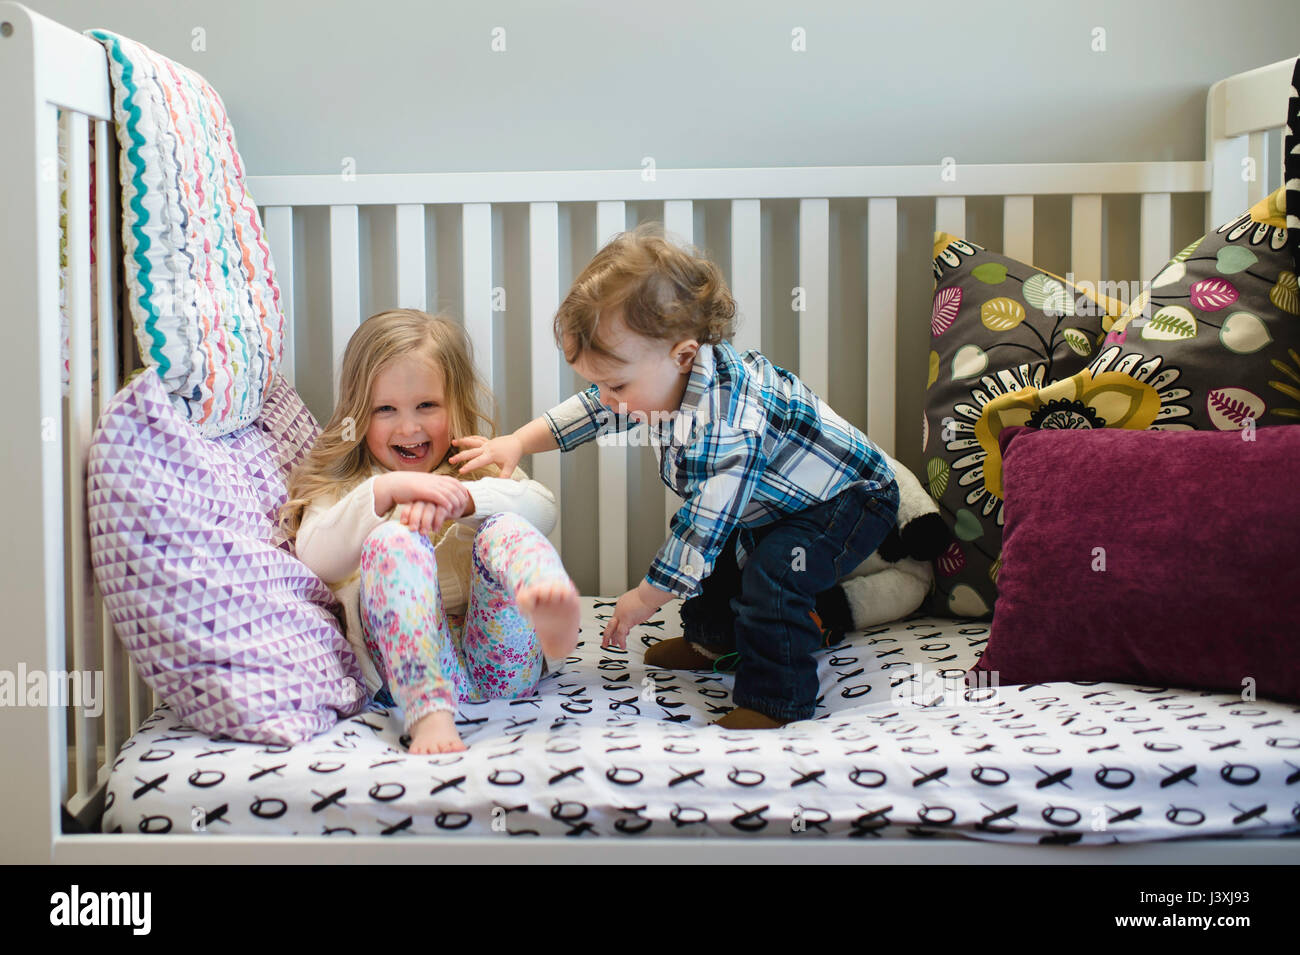 Male toddler and sister playing on day bed Stock Photo